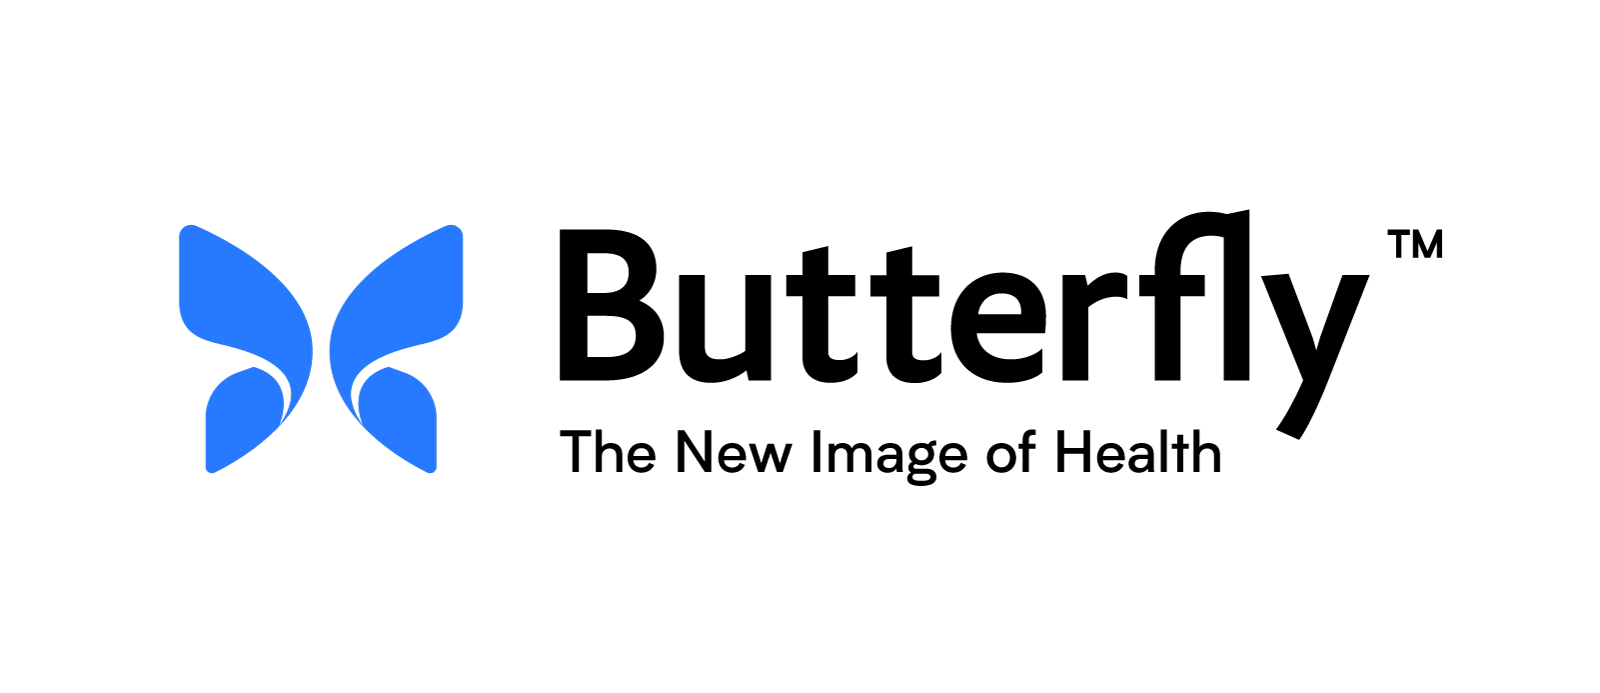 Butterfly Introduces Two Ultrasound Education Offerings